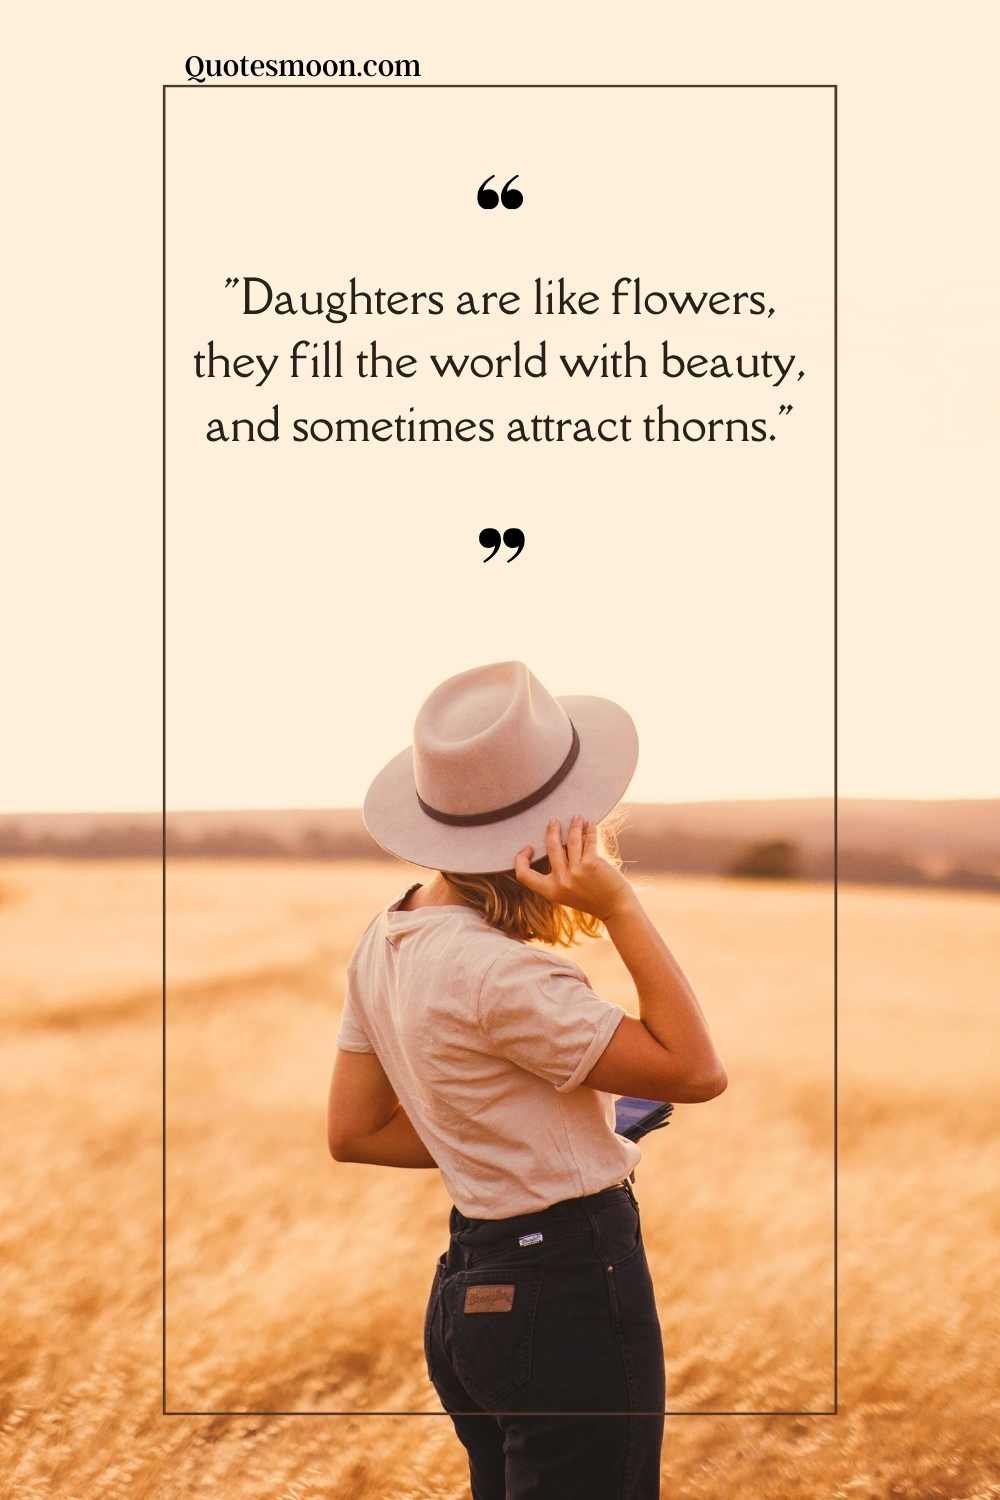 Proud Of You Quotes Daughter images